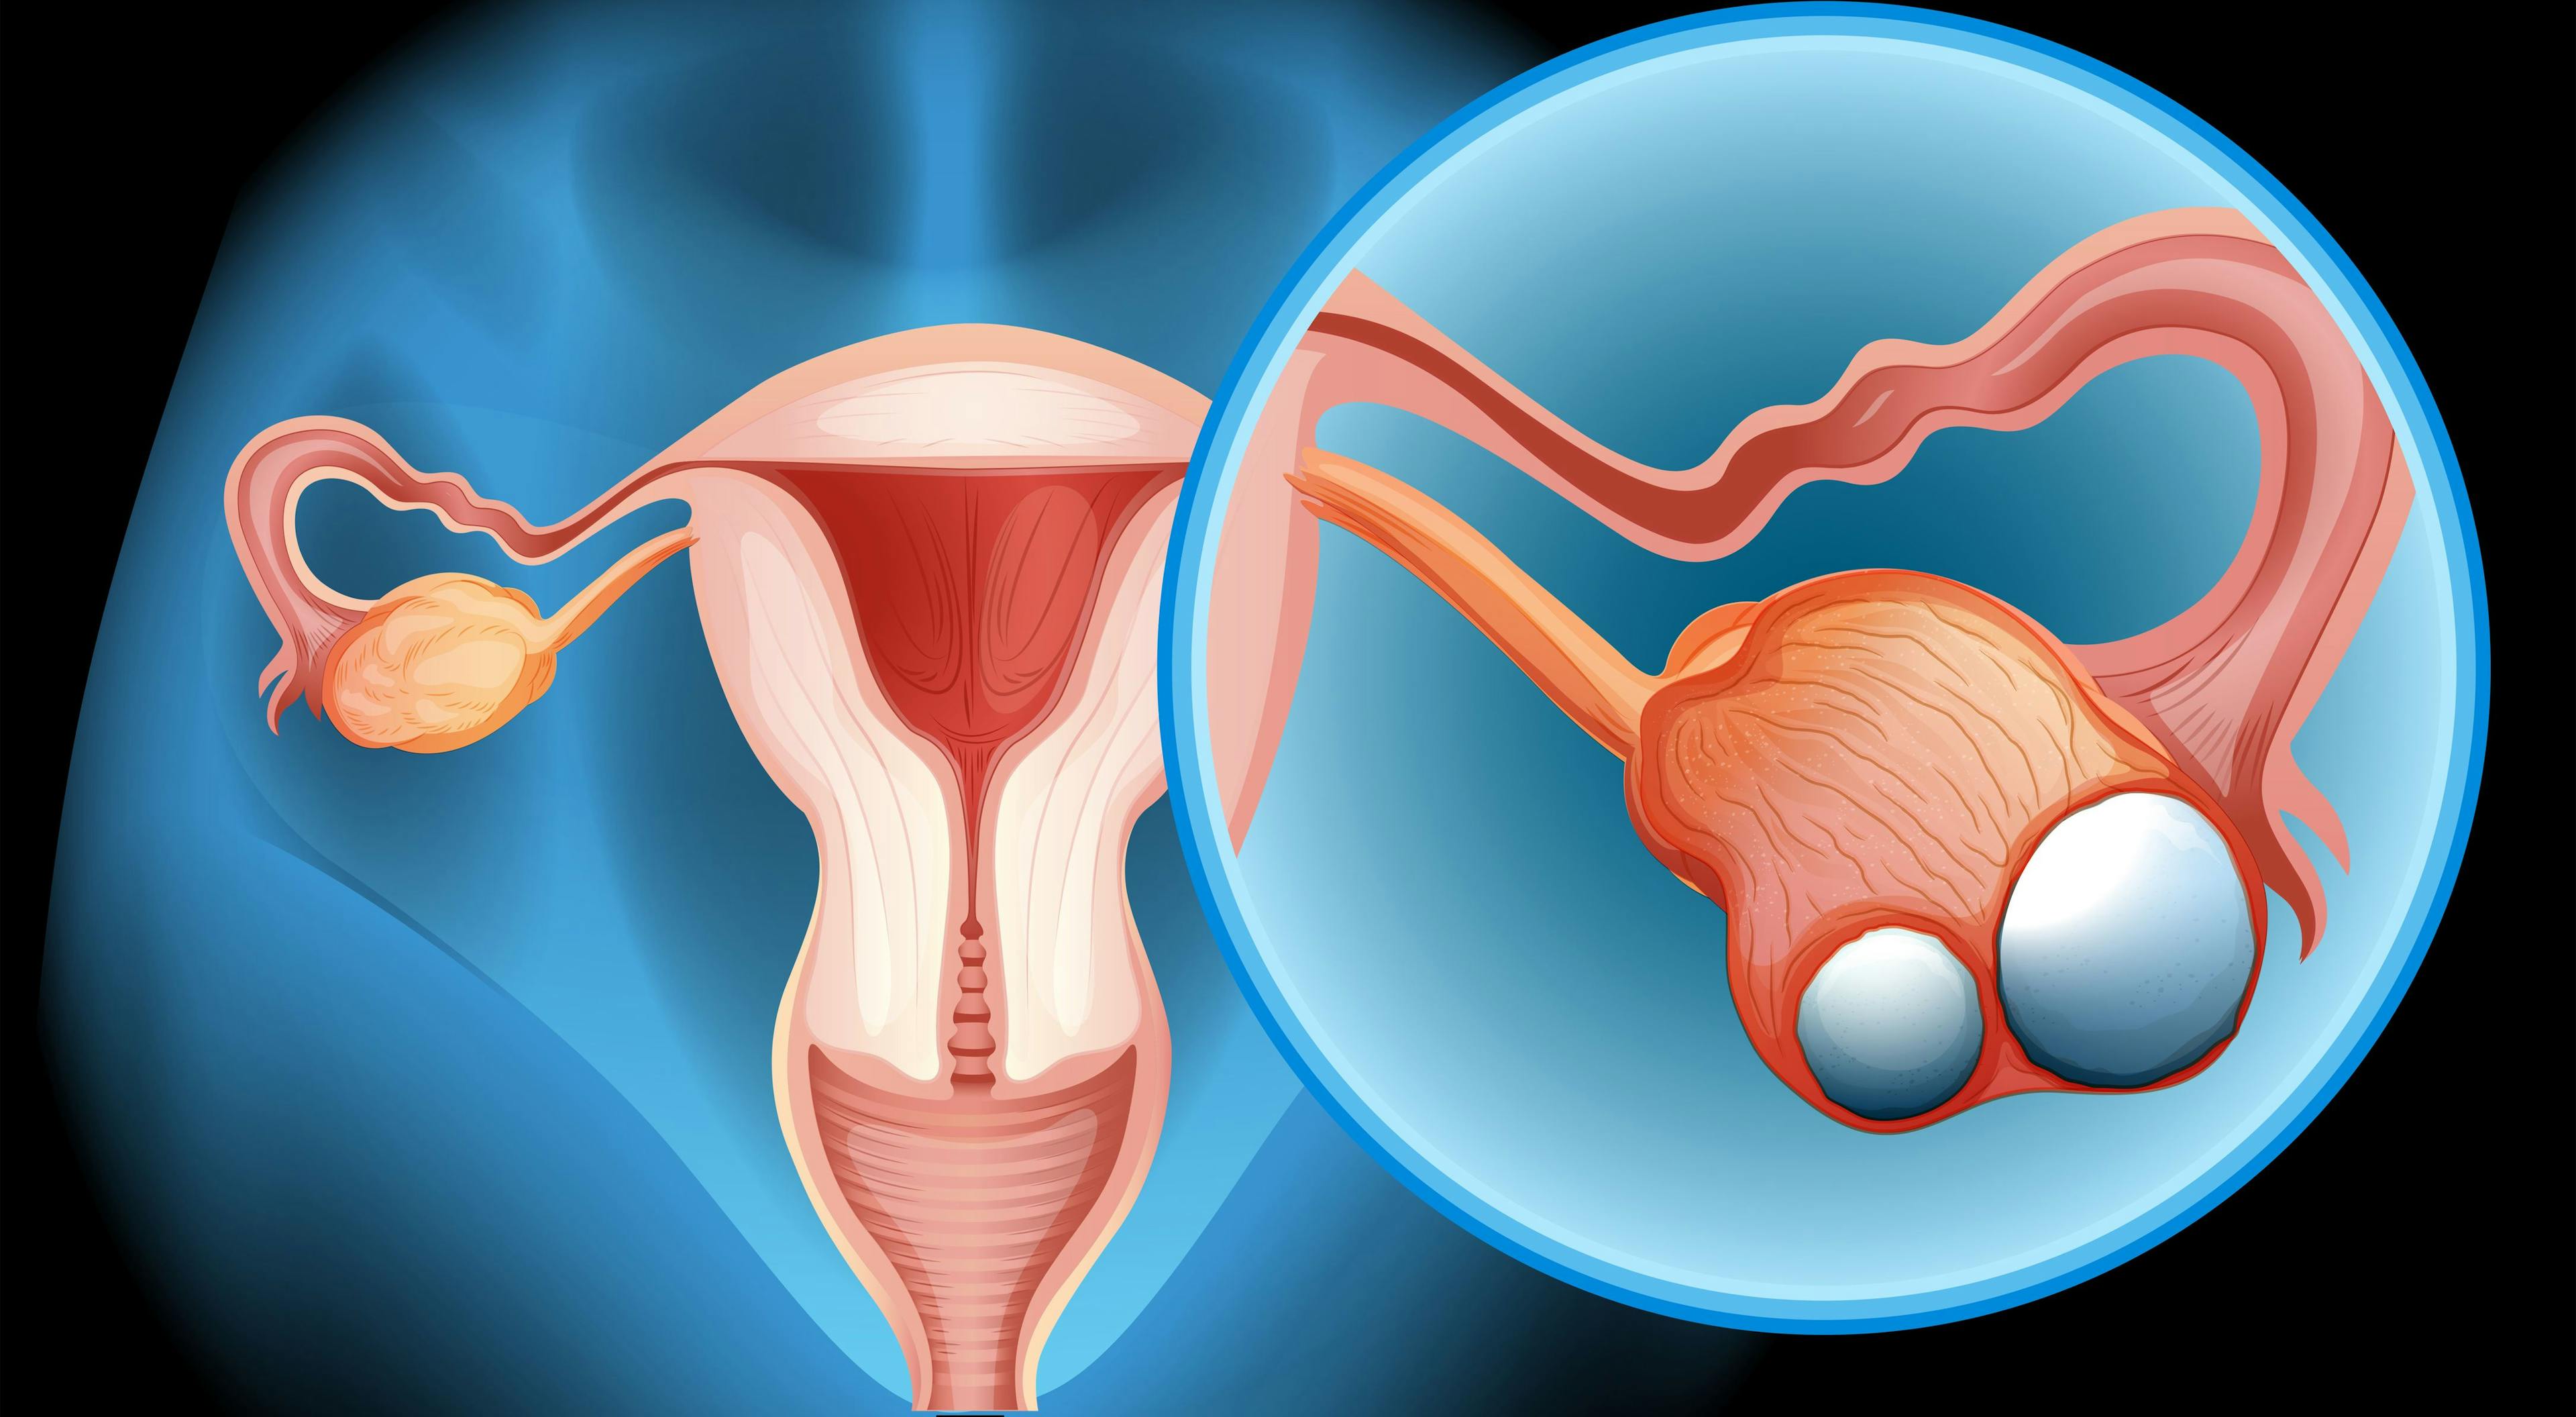 Harms Outweigh Benefits From Screening Women at Average Risk for Ovarian Cancer